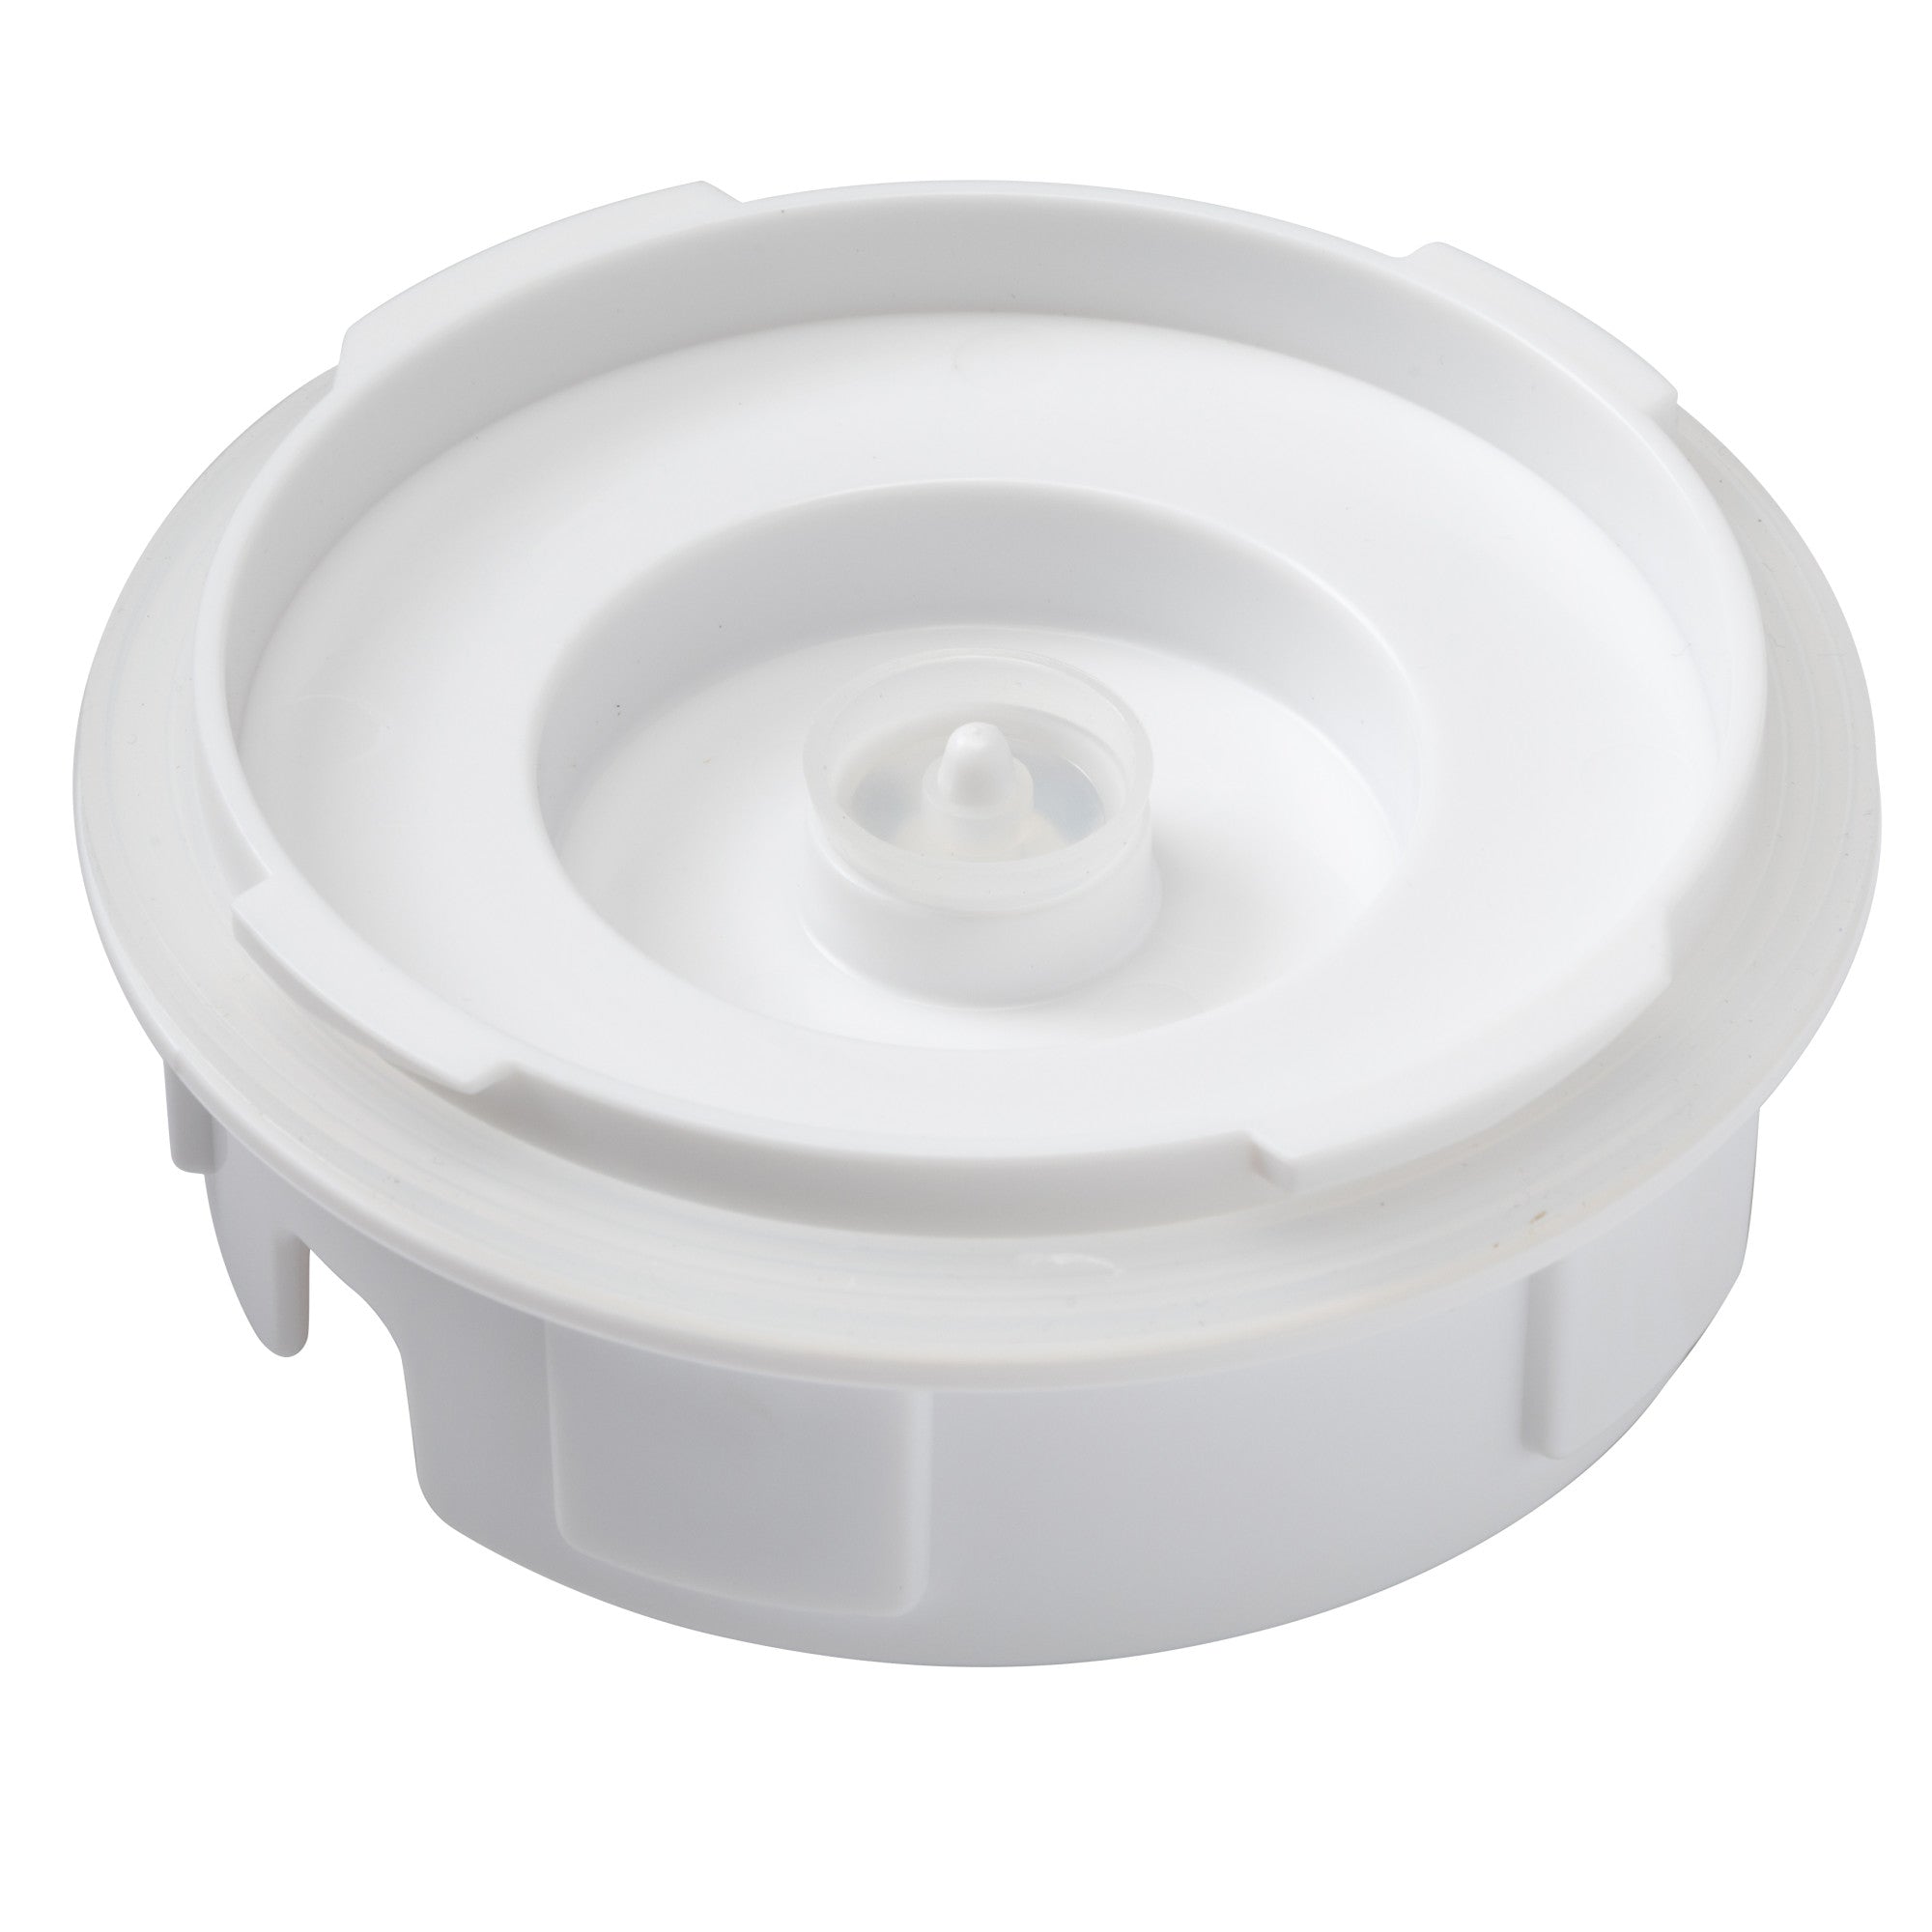 Stay Clean Humidifier Replacement Tank Cap